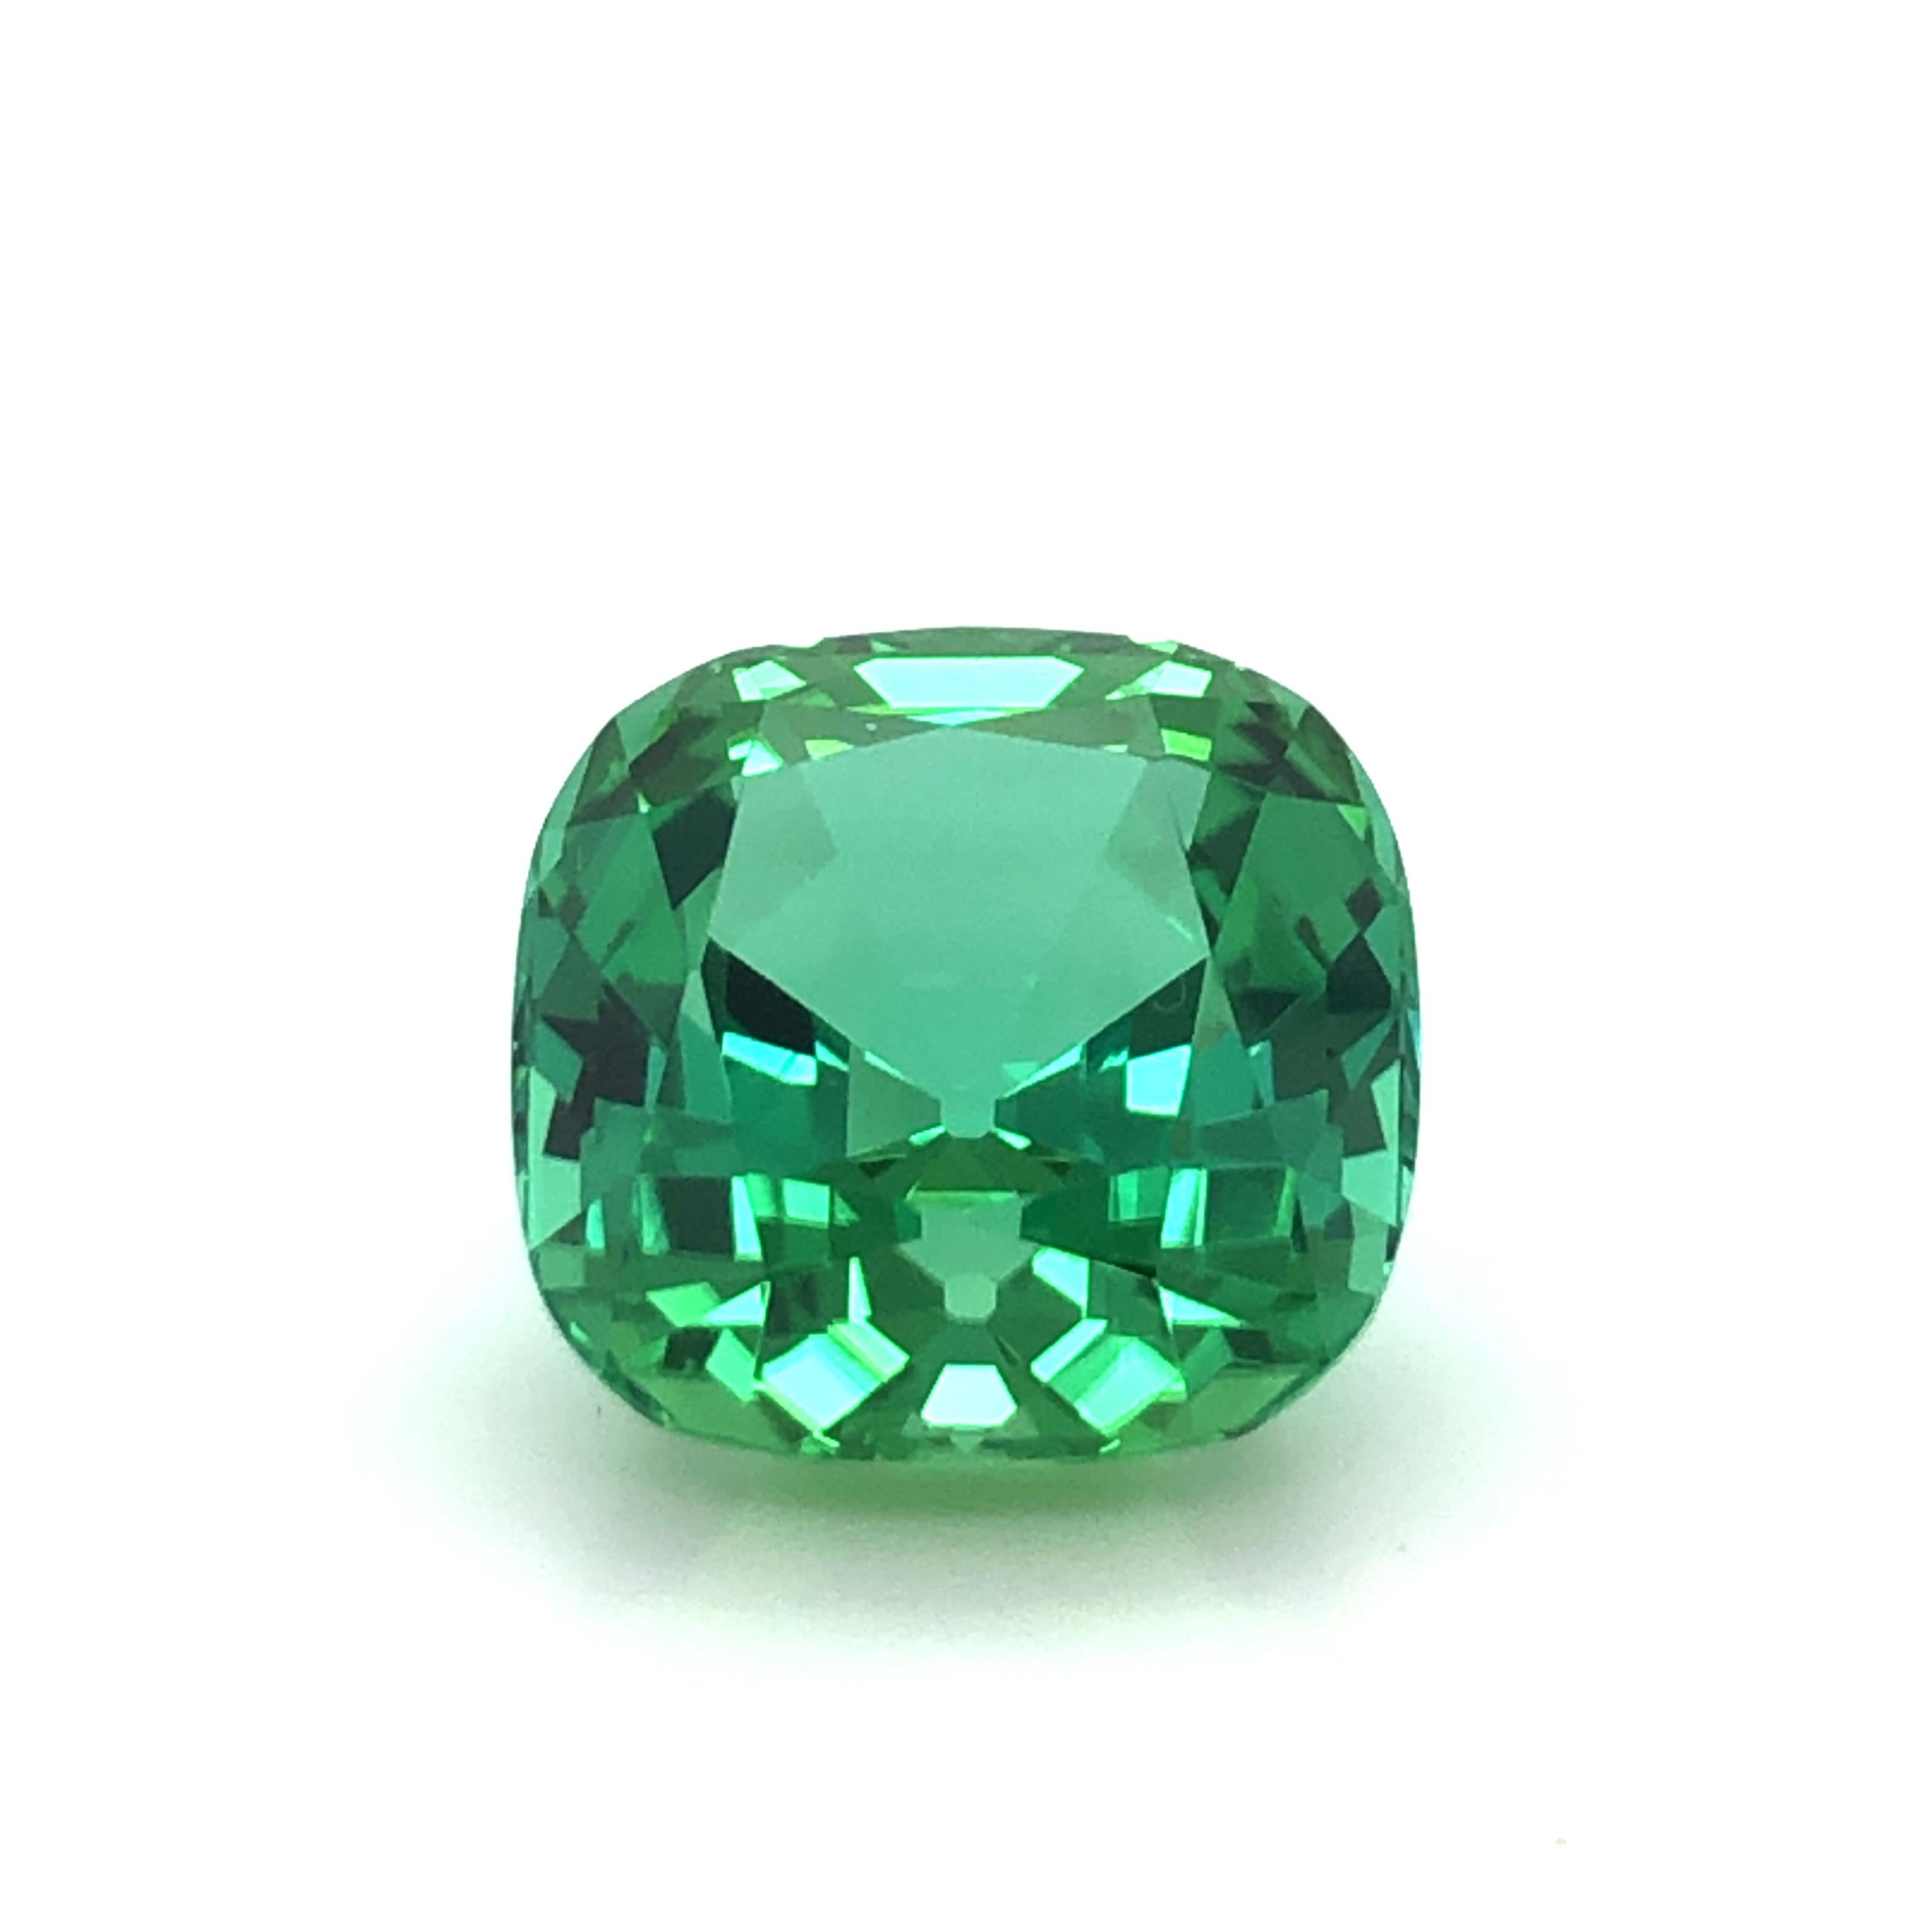 Very attractive mint colored Tourmaline of 15.76 ct. The square cushion shaped gem stands out do to its vibrant greens of different shades. 

The perfect cut stone measures 14.57 x 14.55 x 10.55 mm and is accompanied by Gübelin Gemstone Report no.